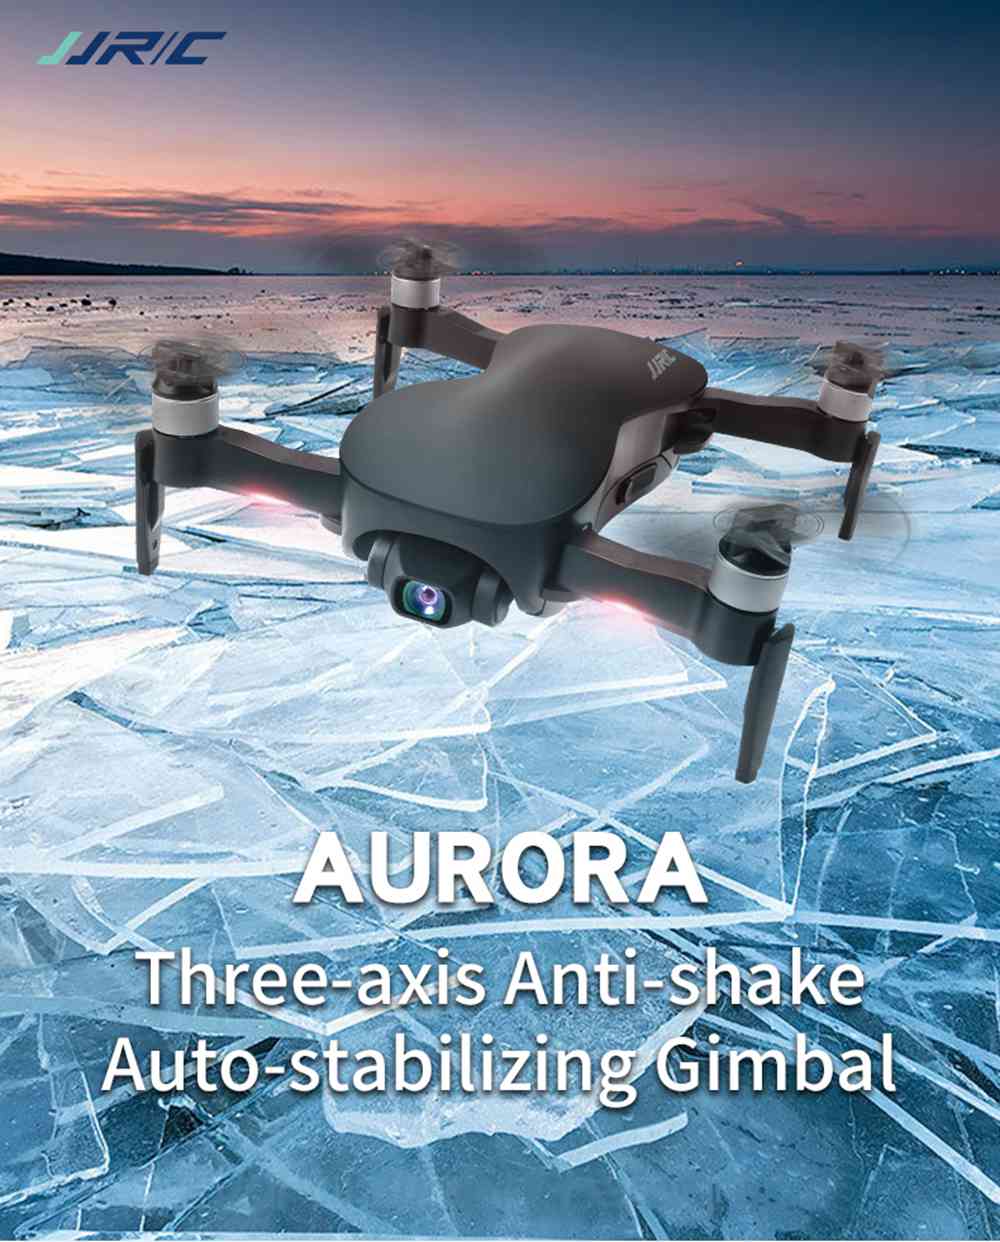 JJRC X12 AURORA 5G WIFI 1.2km FPV GPS Foldable RC Drone With 1080P 3Axis Gimbal Ultrasonic Optical Flow Positioning RTF - Two Batteries With Bag